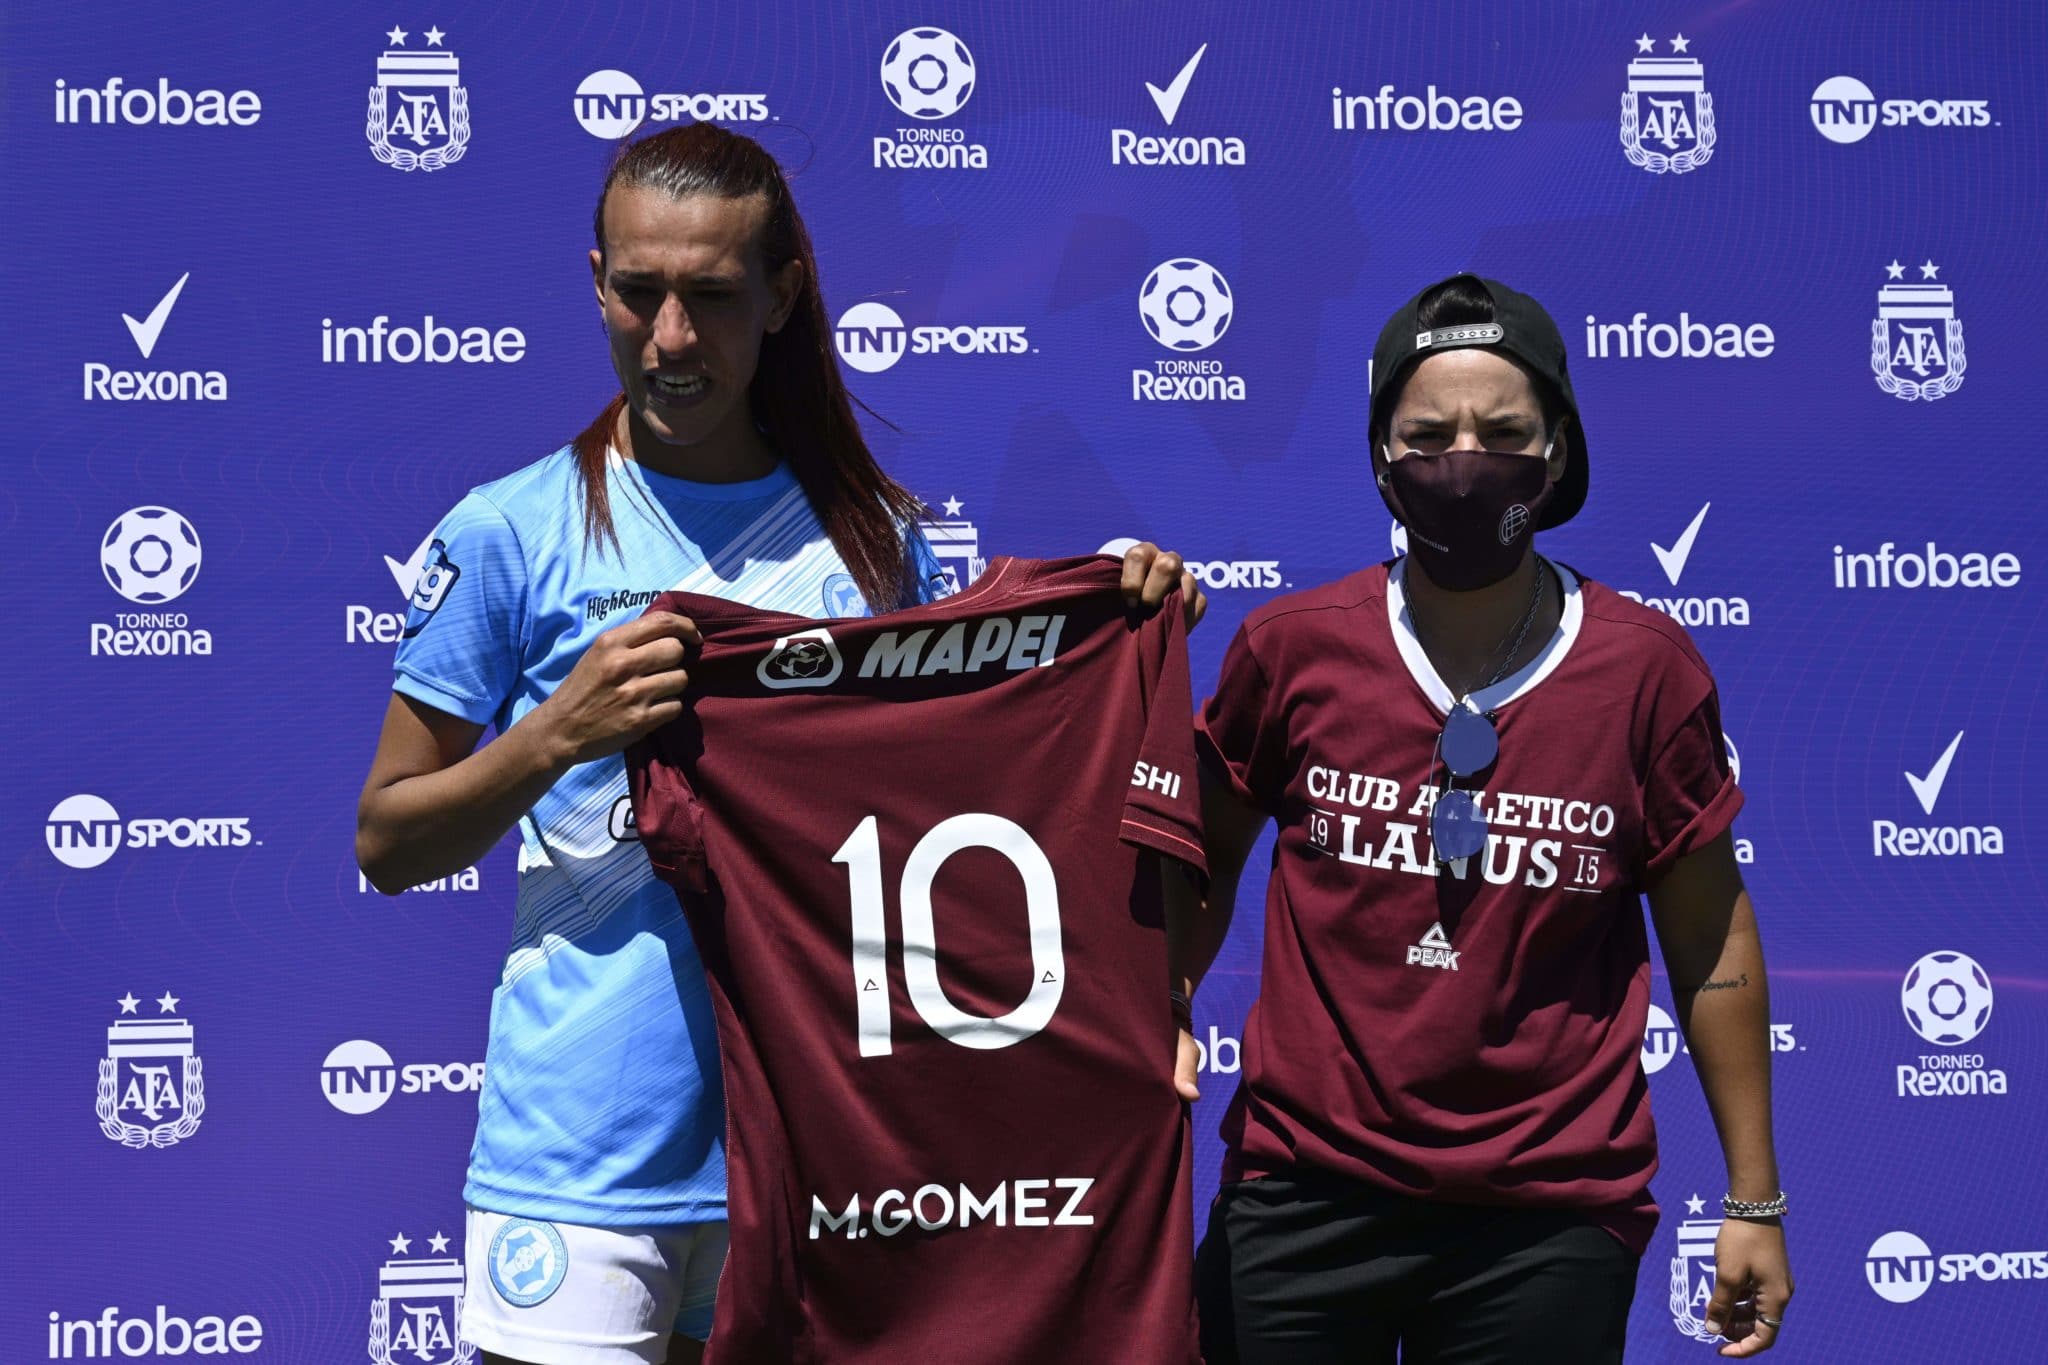 Mara Gómez poses with a jersey of Lanus with her name on it given as present after an Argentina first division female football match